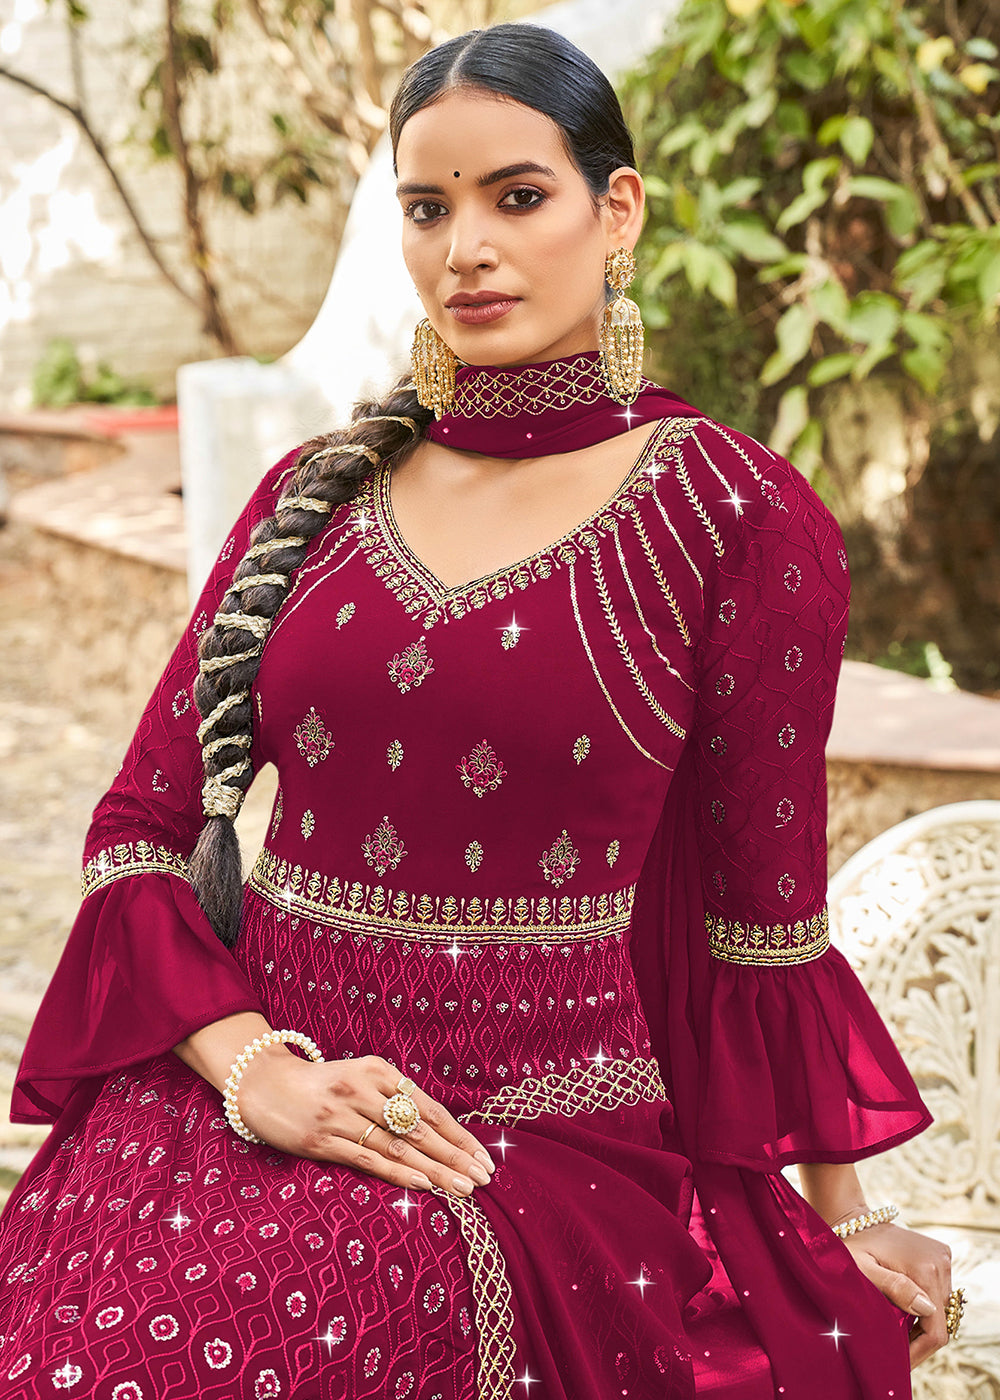 Buy Now Exclusive Pink Georgette Fabric Wedding Wear Anarkali Suit Online in USA, UK, Australia, New Zealand, Canada & Worldwide at Empress Clothing.